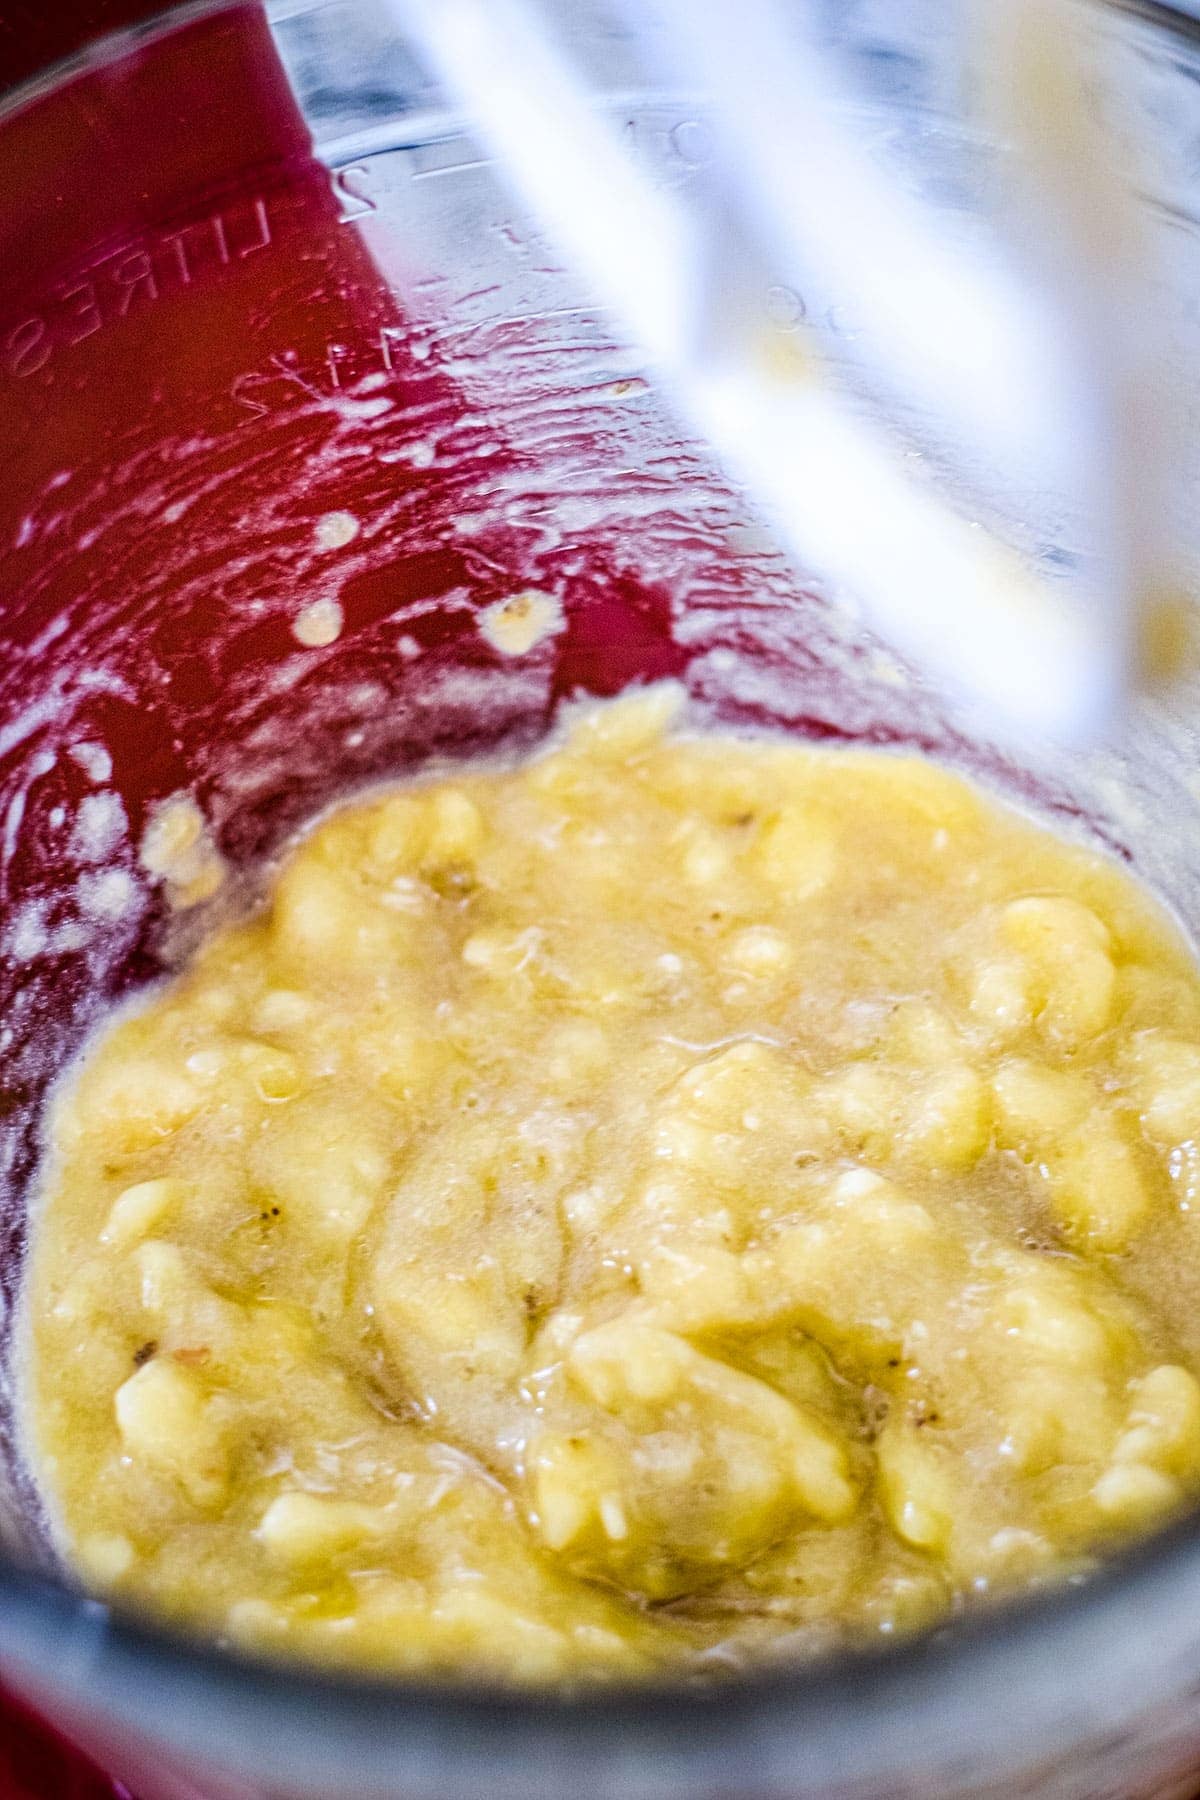 mashed bananas in a glass mixing bowl